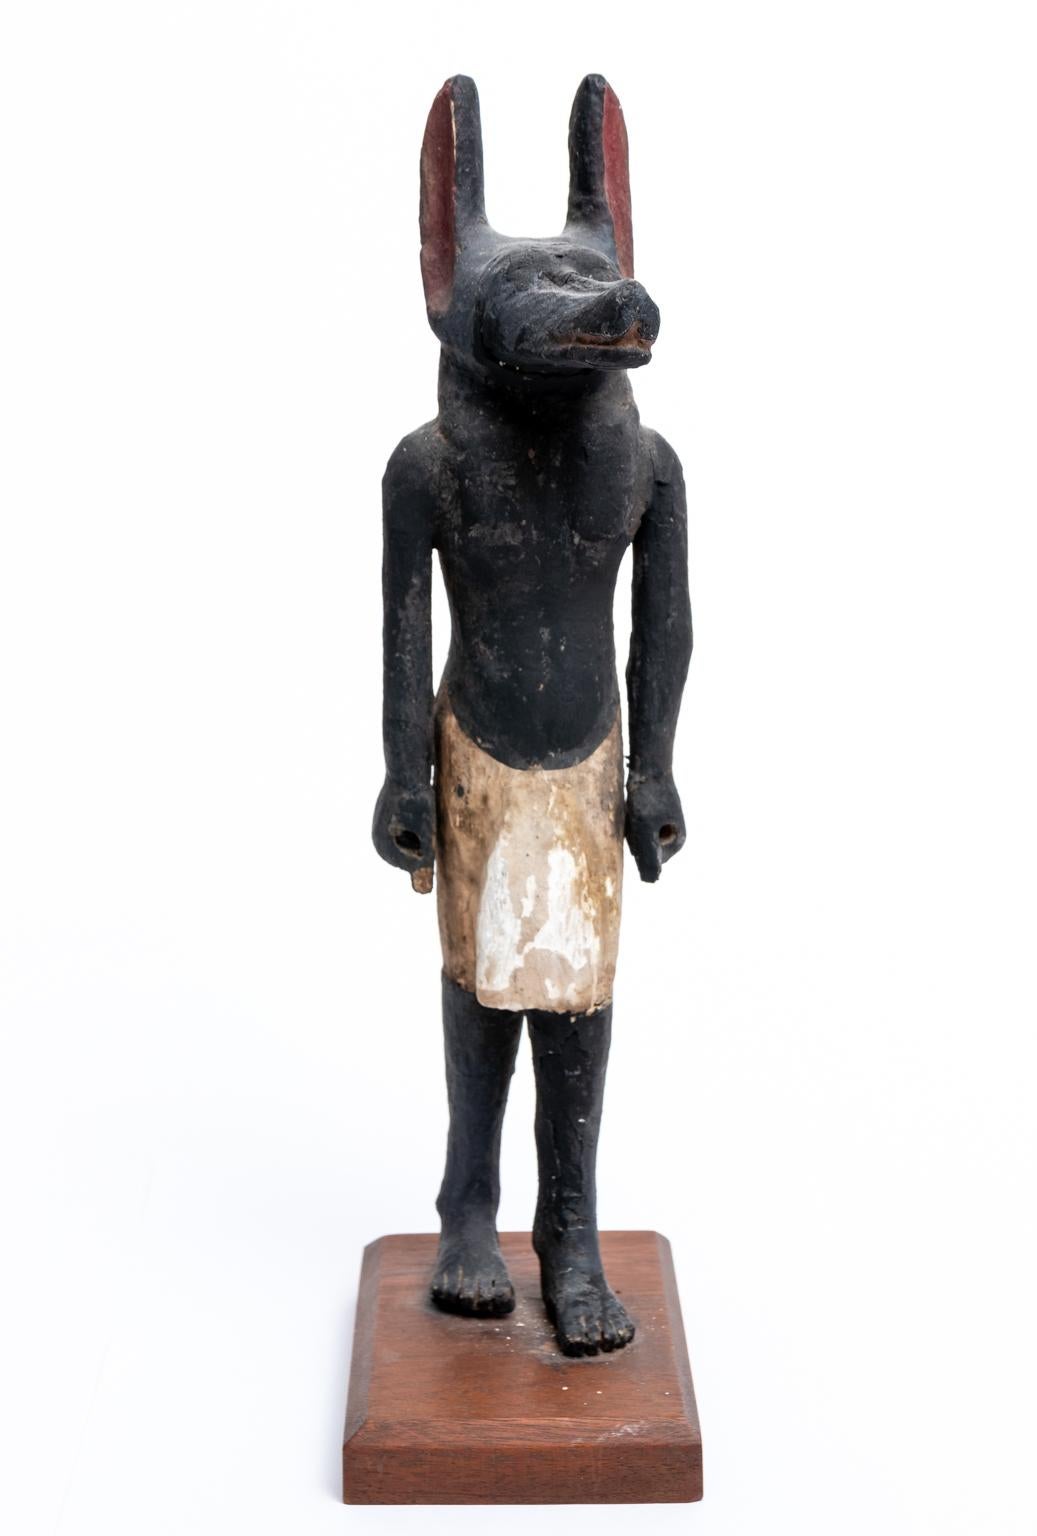 Circa 500 BC carved and painted Cedarwood Anubis statue crafted around the Late Period of Ancient Egyptian history on a later stand. The statue depicts the Ancient Egyptian God of Embalming, Mummification, and the Afterlife in a contrapposto or